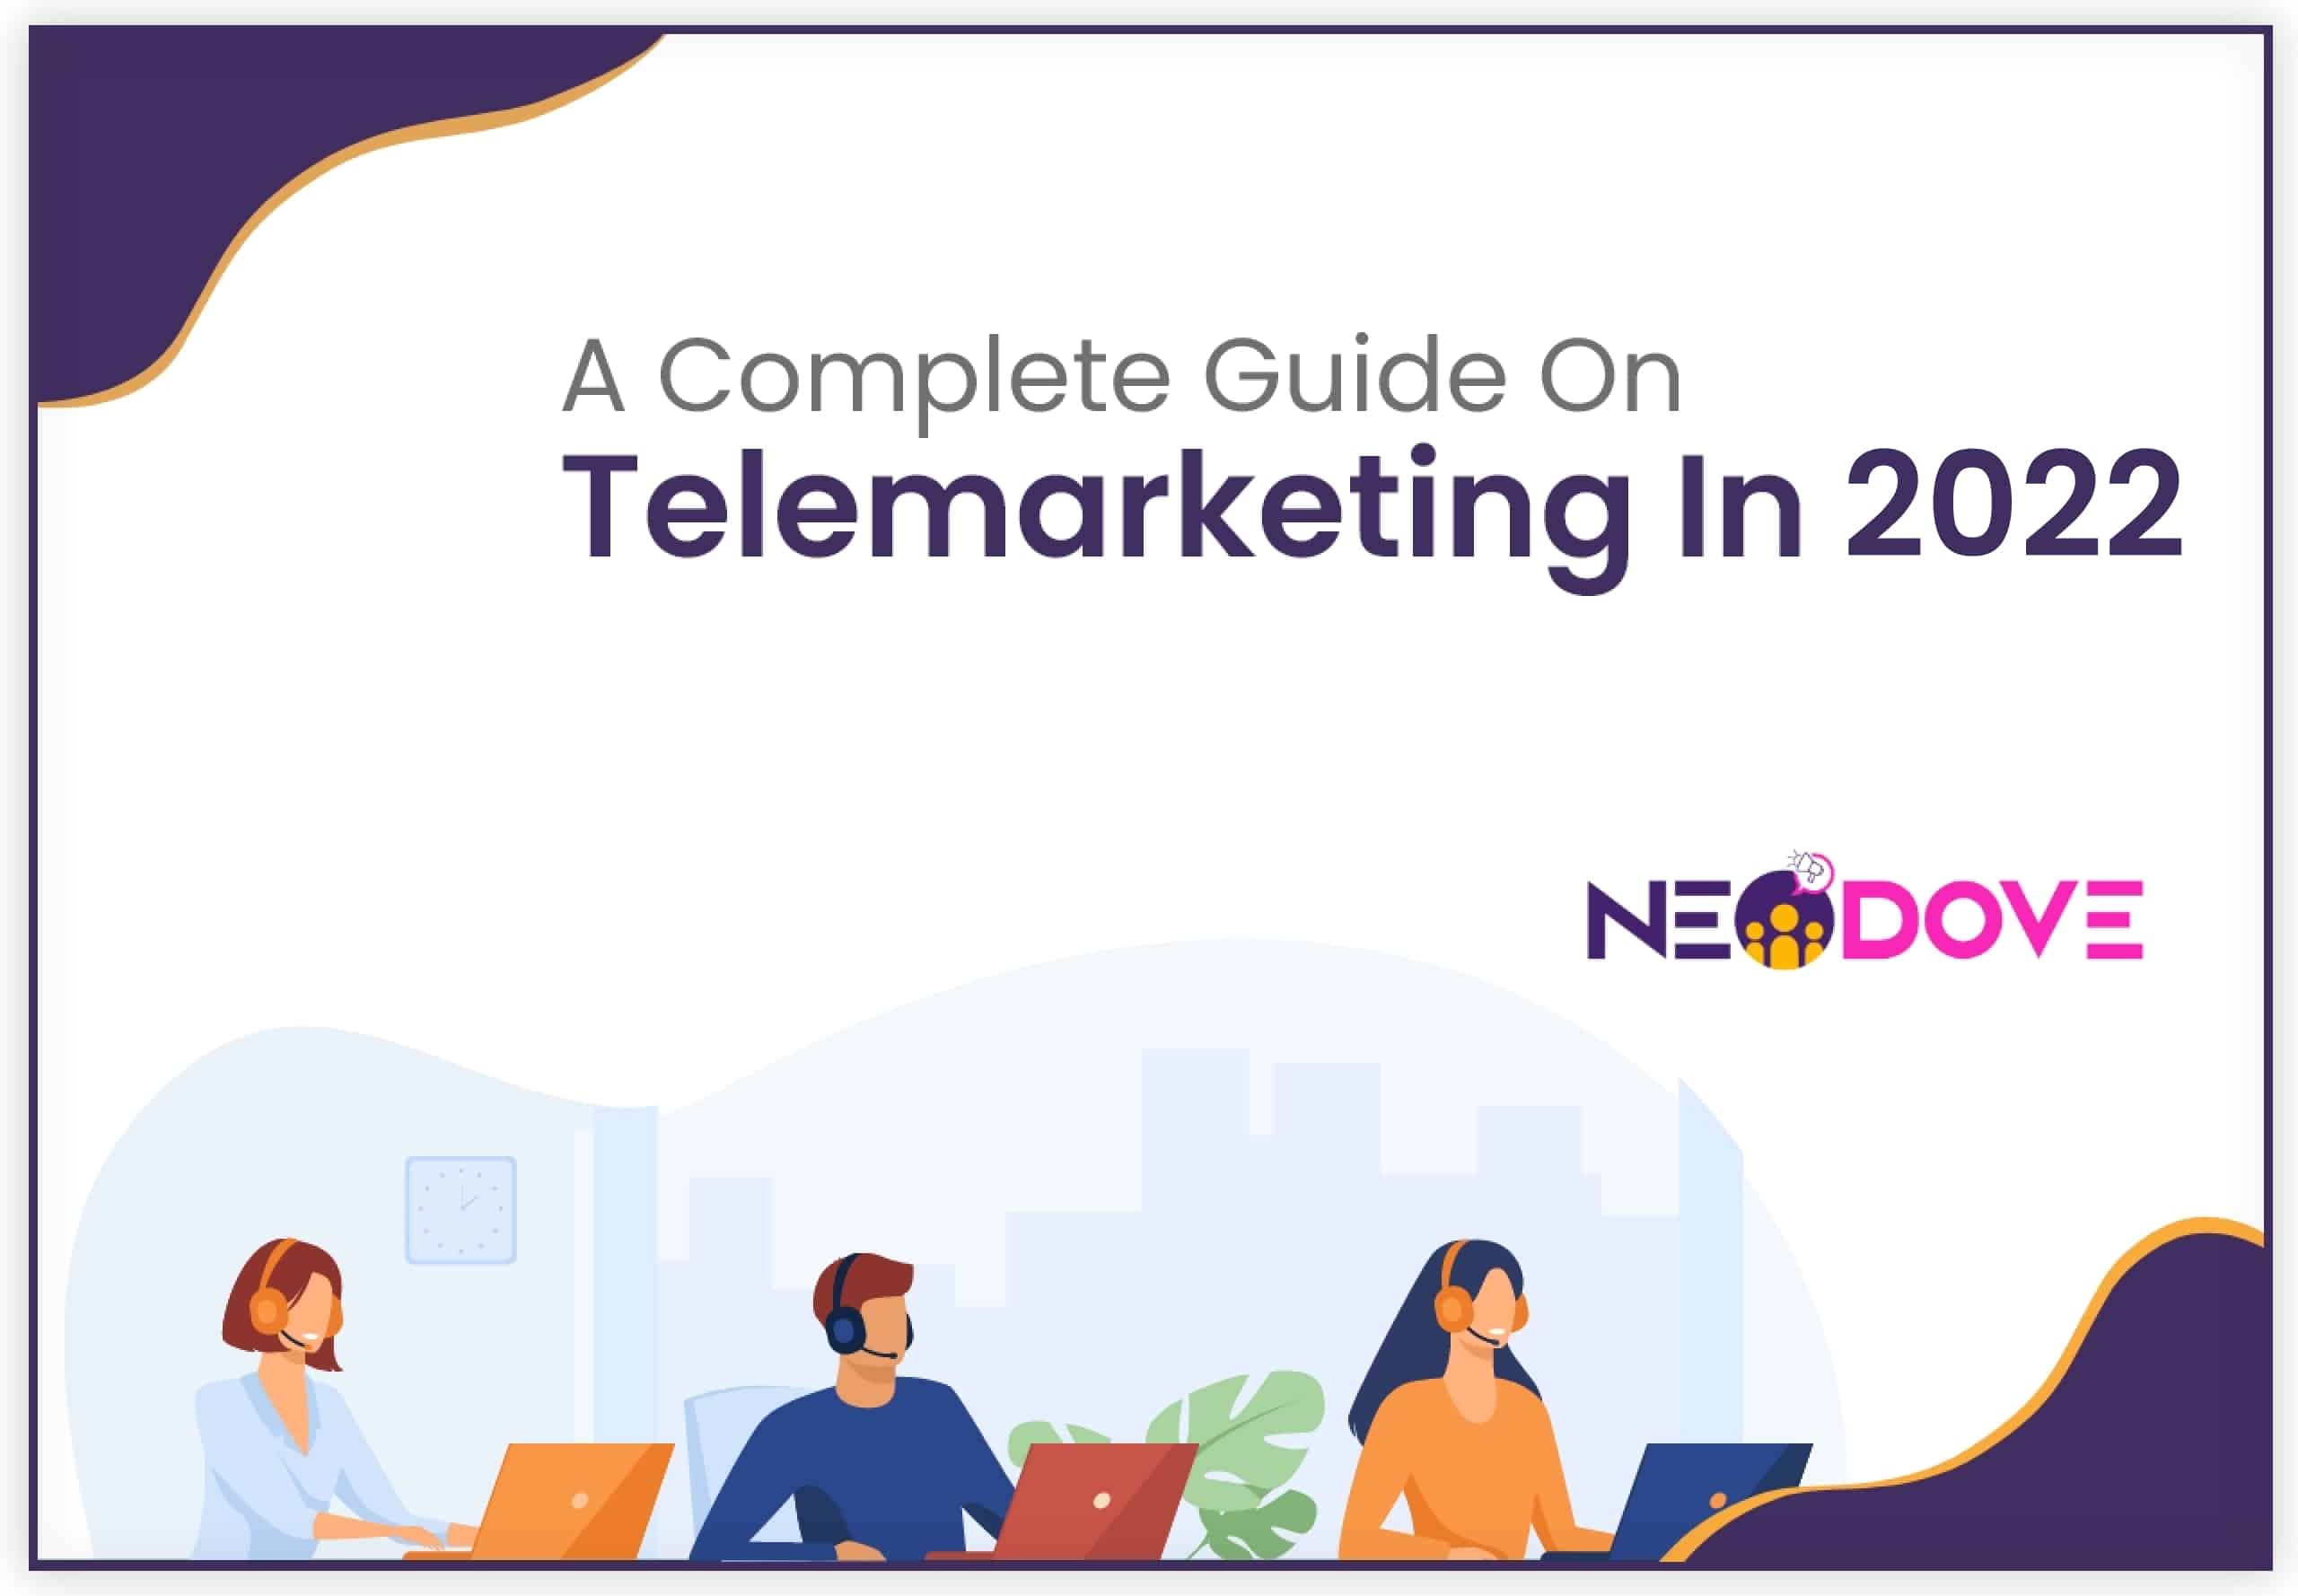 A Complete Guide On Telemarketing In 2022